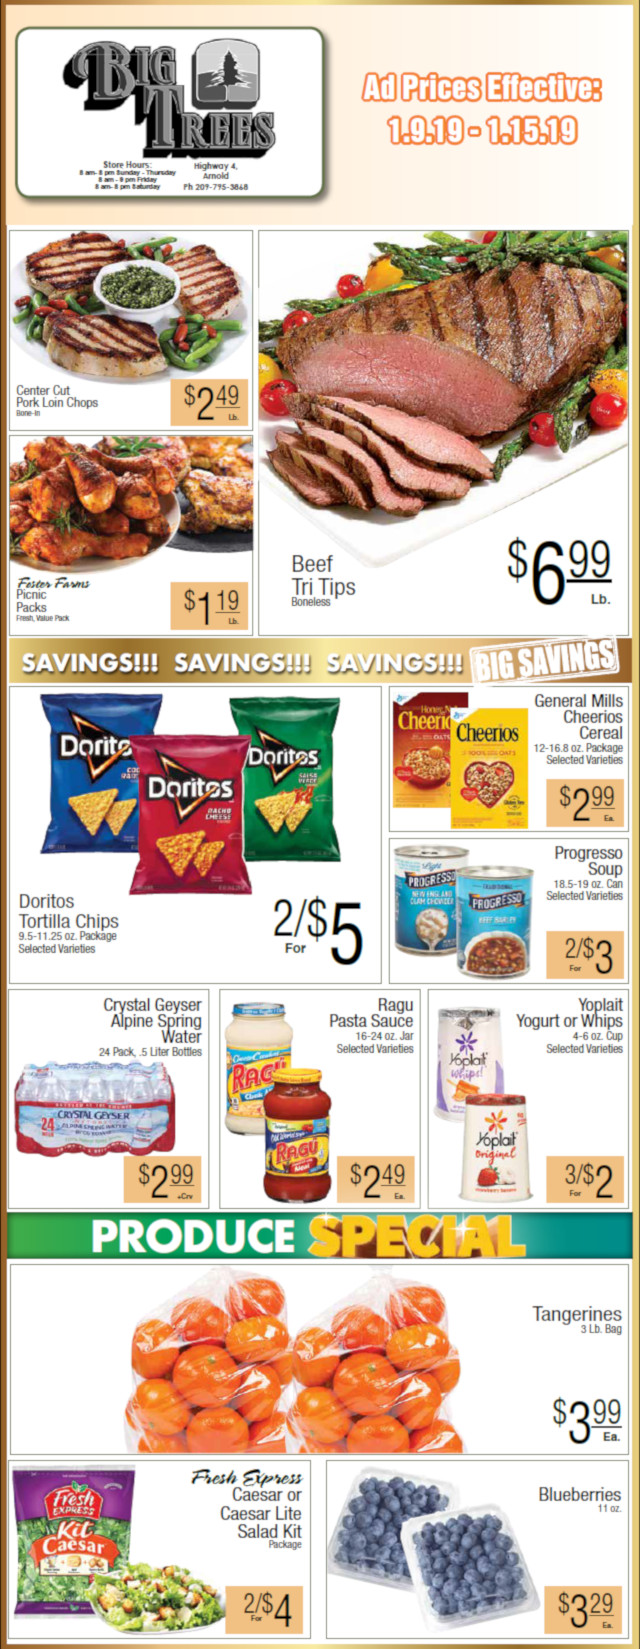 Big Trees Market Weekly Ad & Grocery Specials Through January 15th